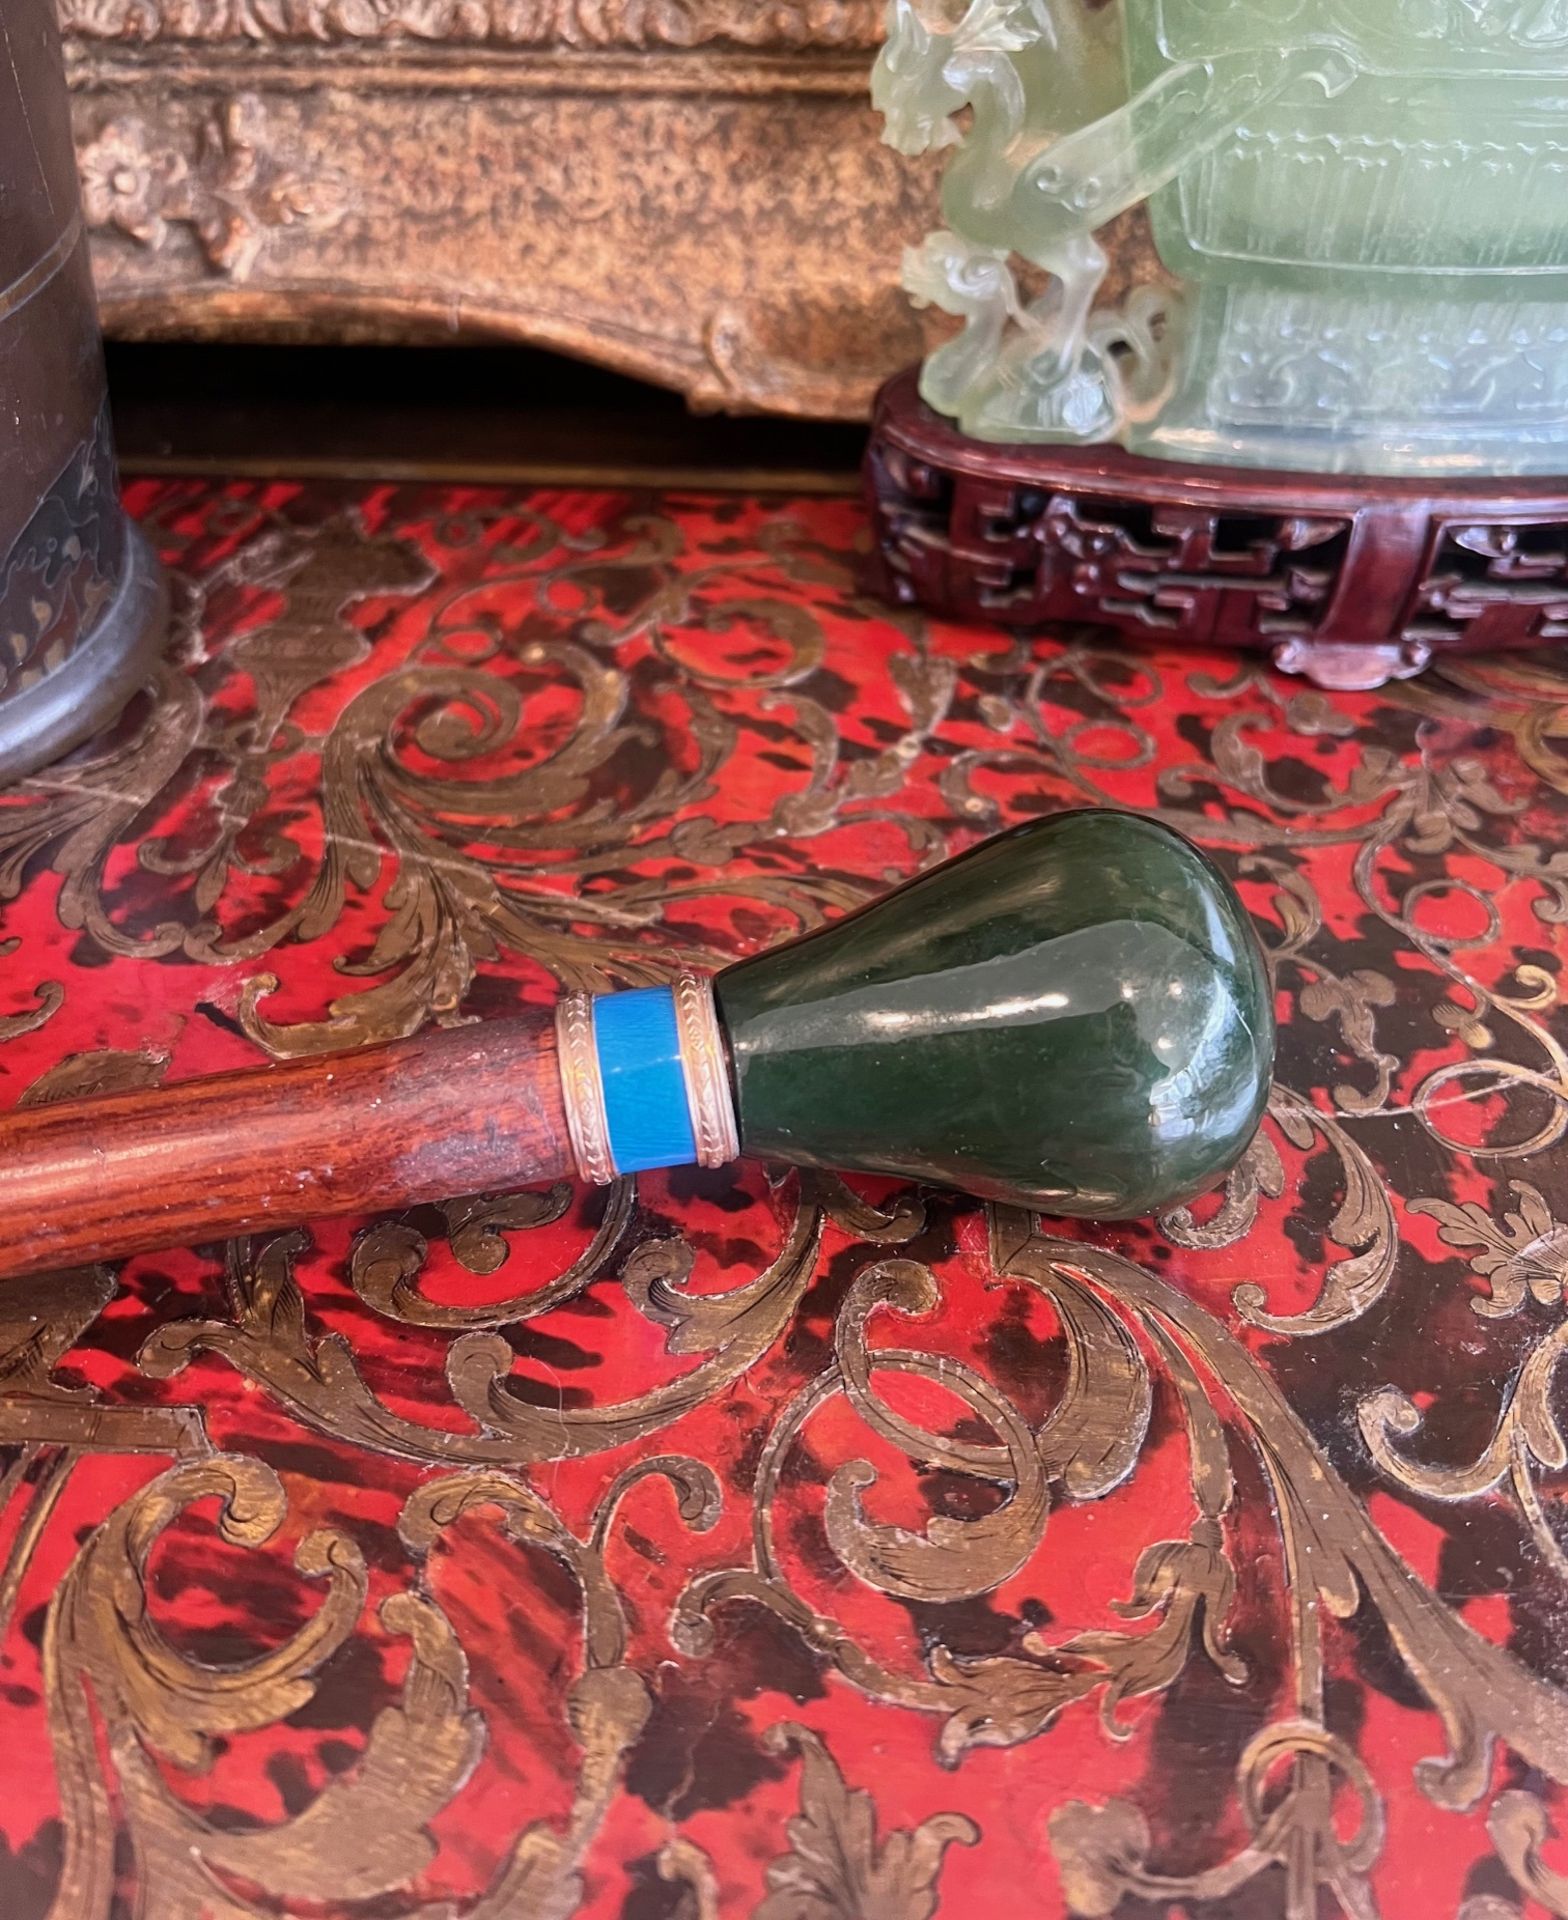 A FABERGE STYLE SILVER GILT, NEPHRITE JADE AND ENAMEL WALKING CANE